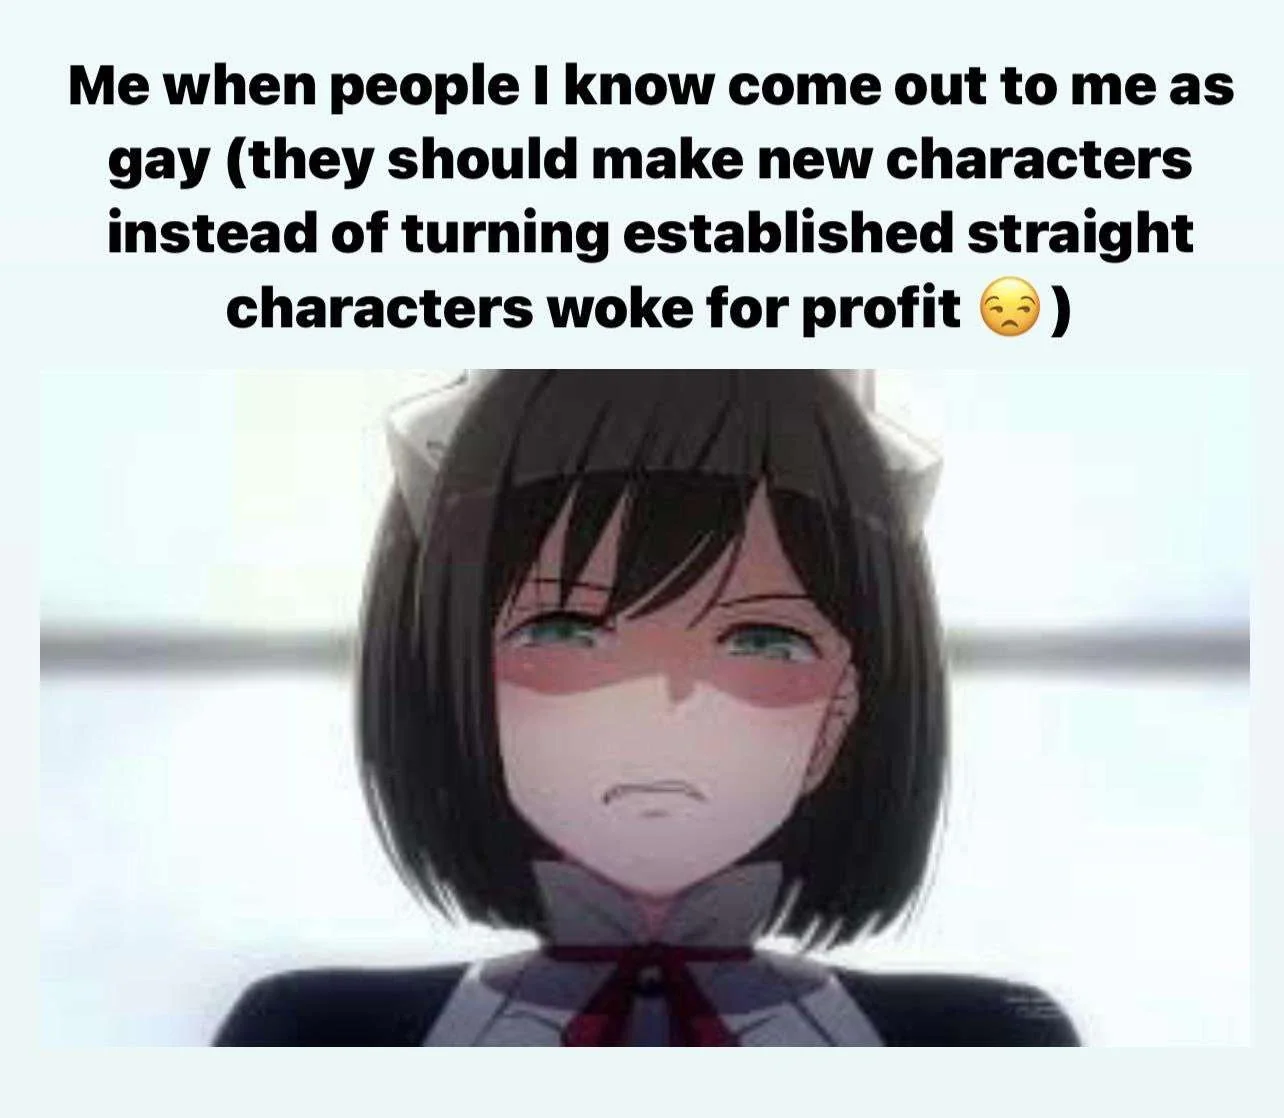 Me when people i know come out as gay (they should make new characters instead of turning established straight characters woke for profit :( )